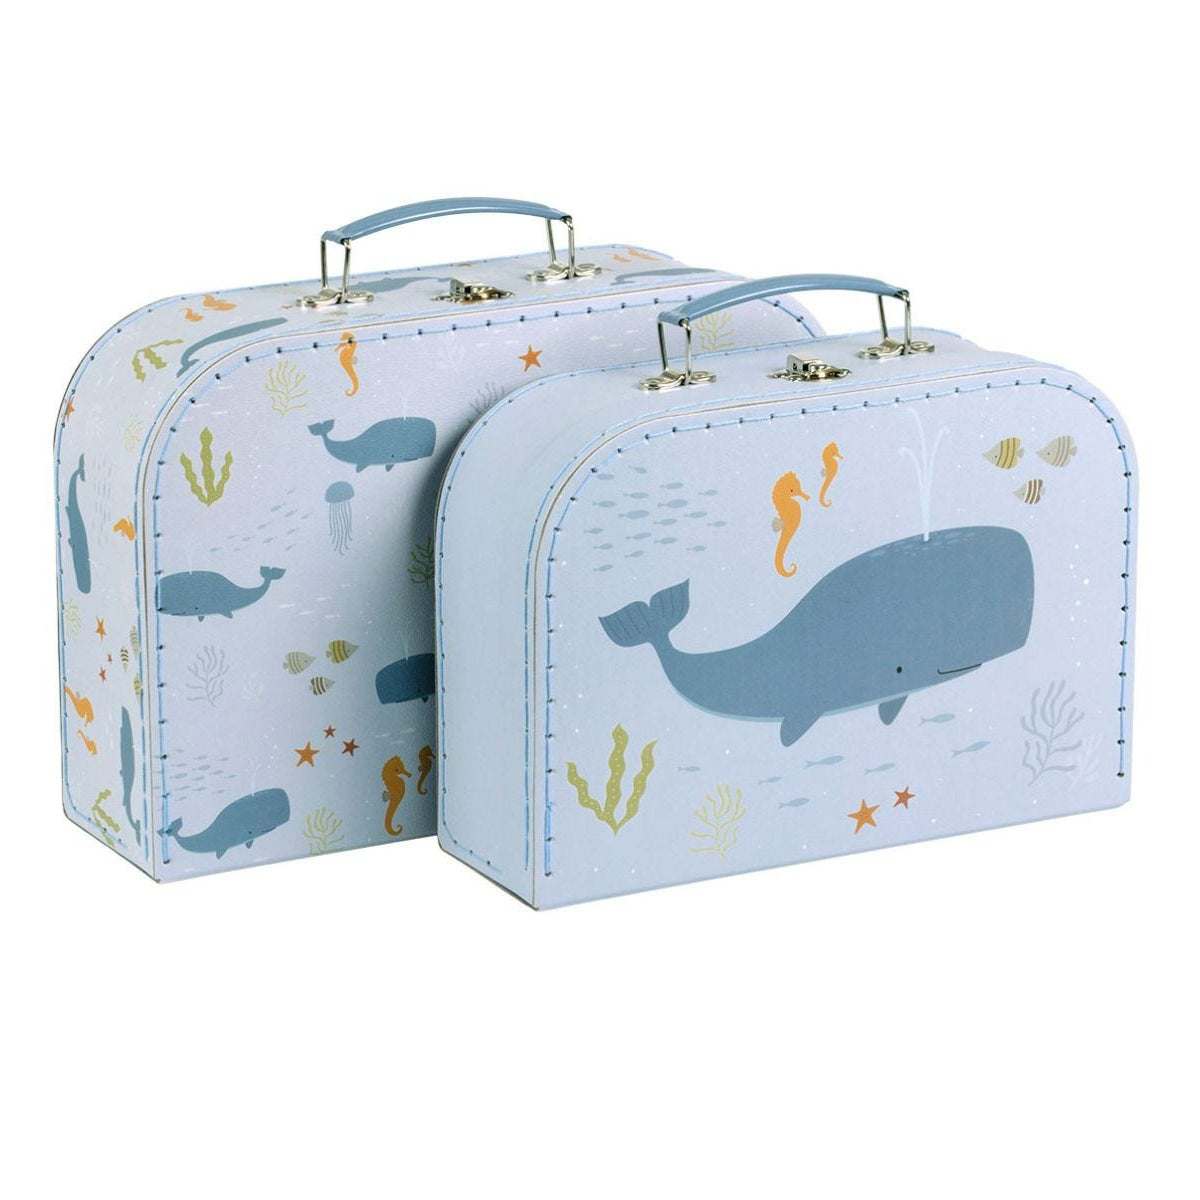 a-little-lovely-company-suitcase-set-ocean- (1)